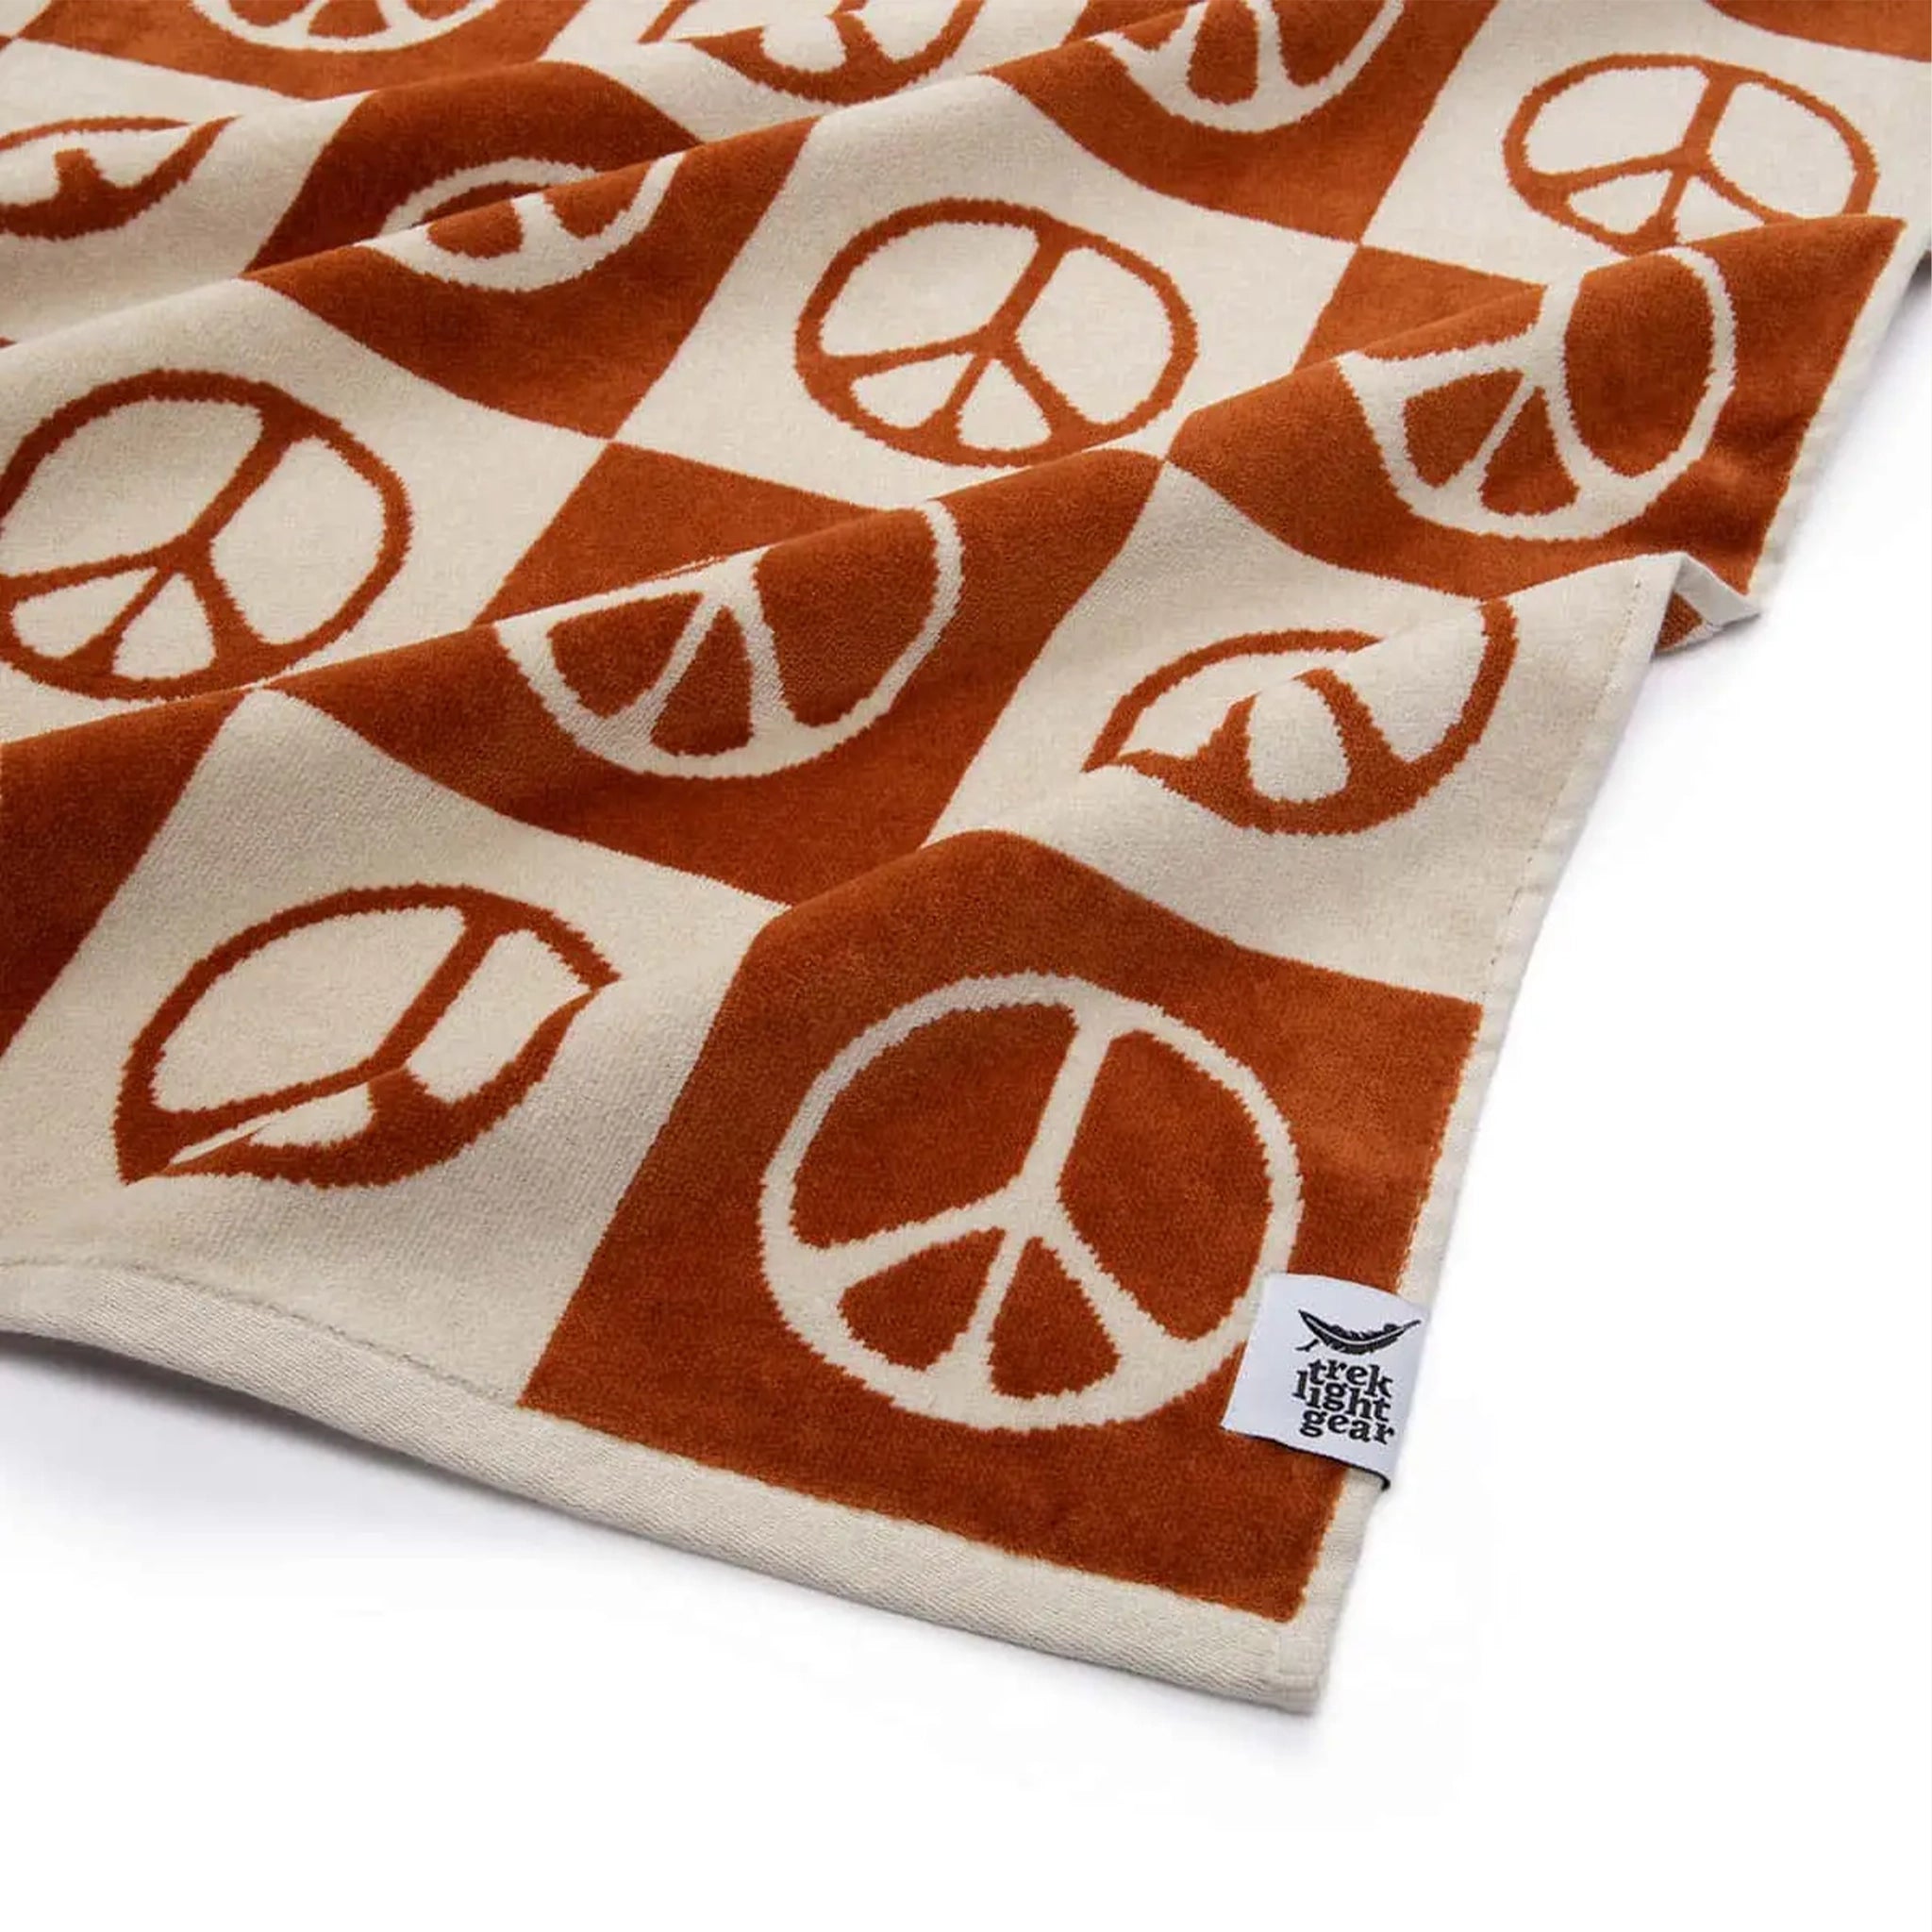 A brown/rust and cream checkered beach and bath towel that has a coordinating peace sign design in each square.